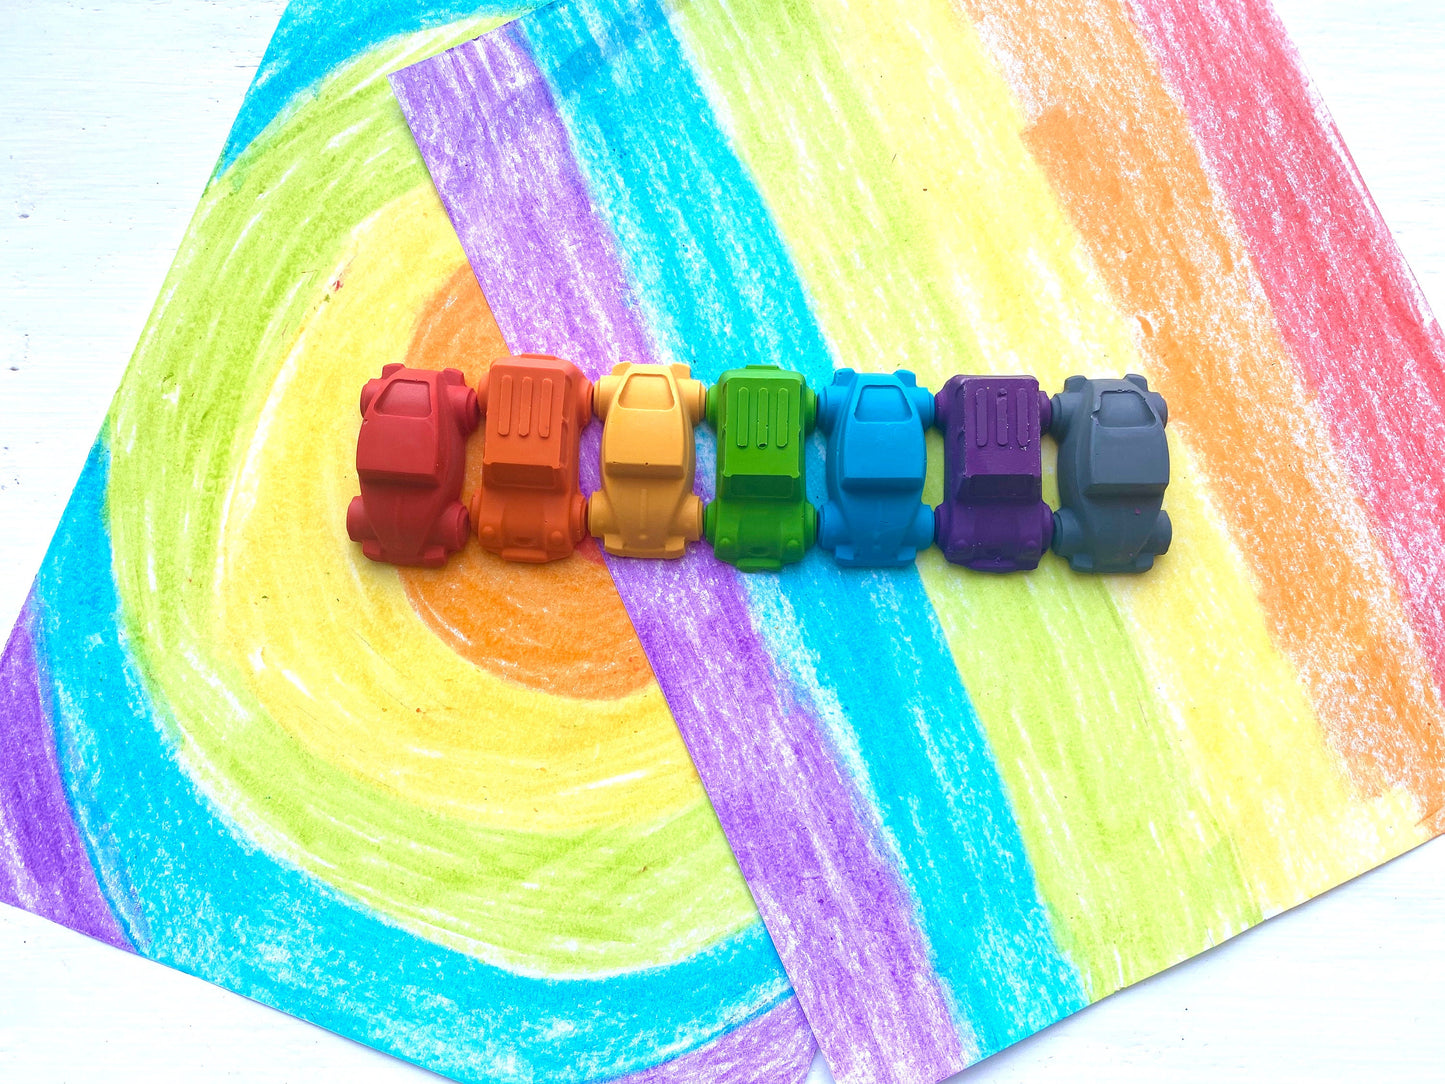 Car Crayons - Car Party Favors - Gifts For Kids - Stocking Stuffers For Kids - Birthday Gifts - Kids Gifts - Kids Party Favor - Class Favors